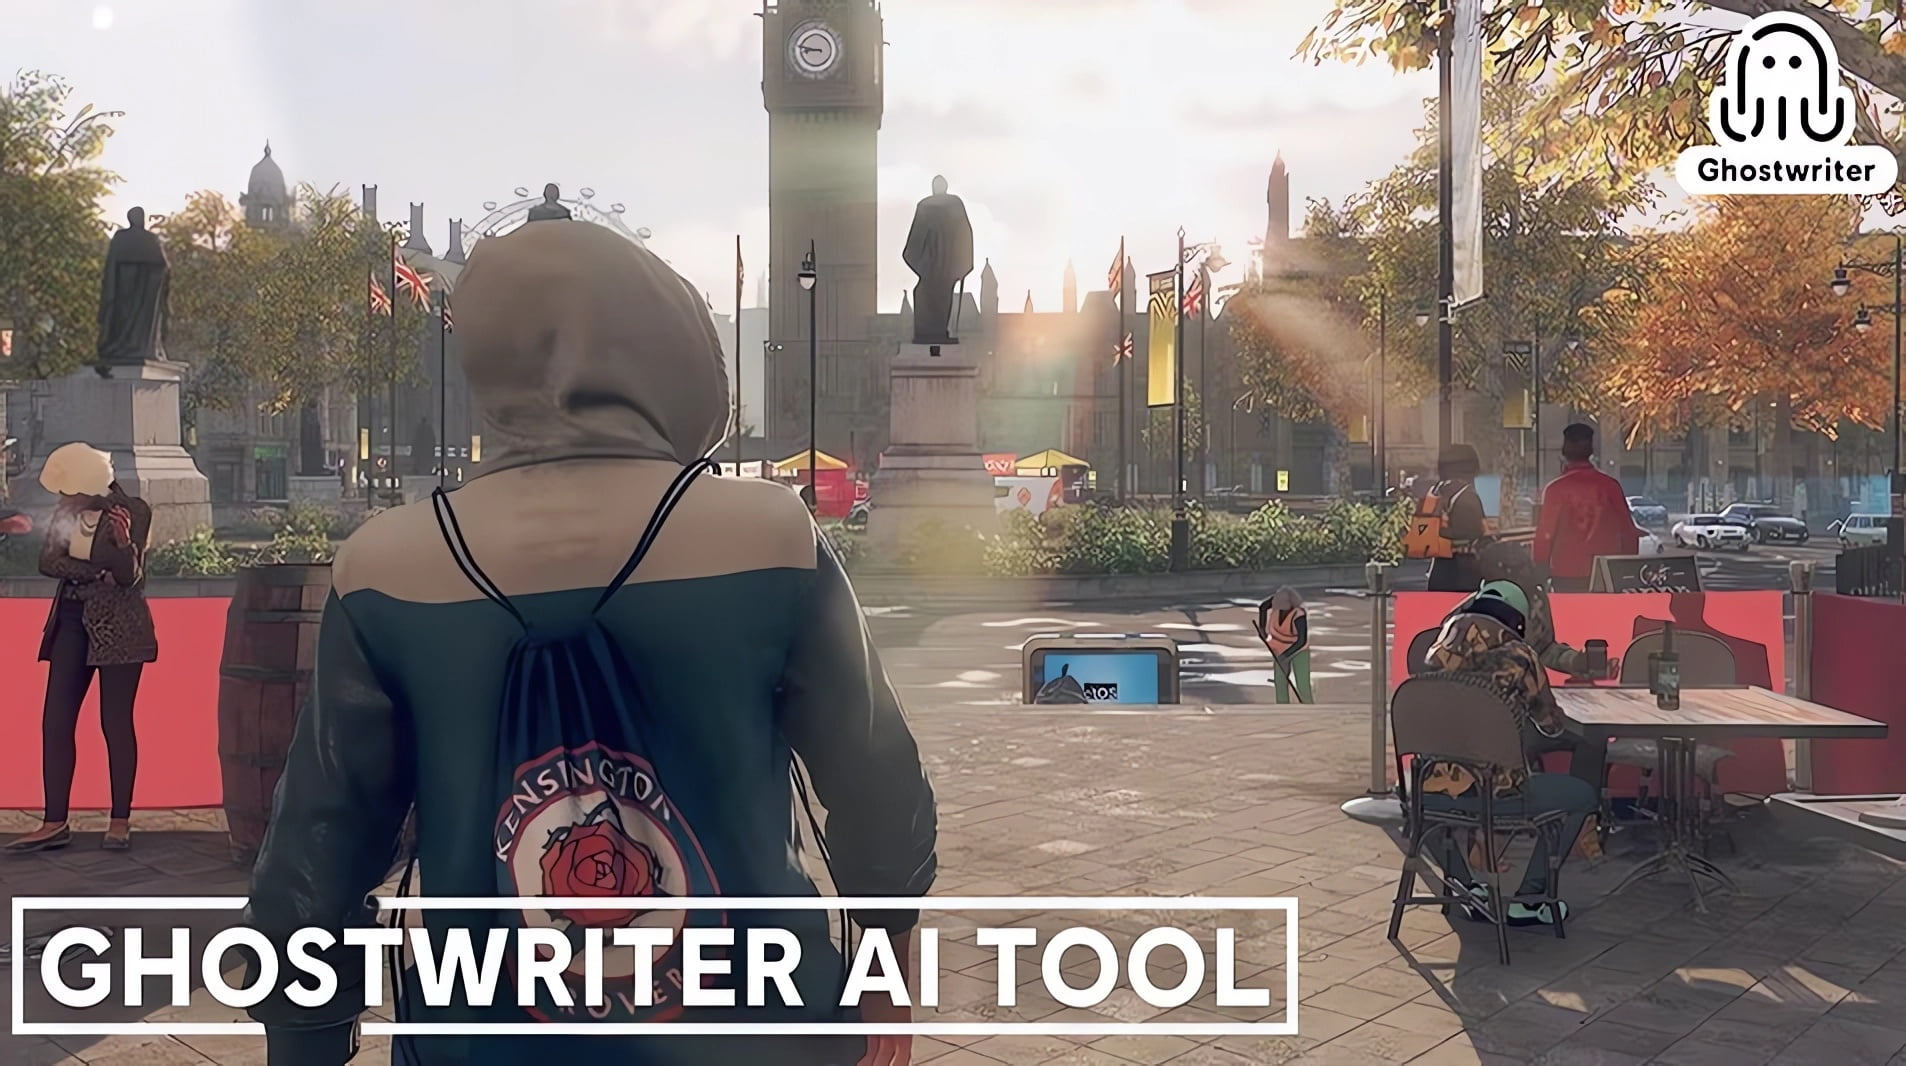 Ubisoft’s “Ghostwriter” aims to make life easier for video game writers